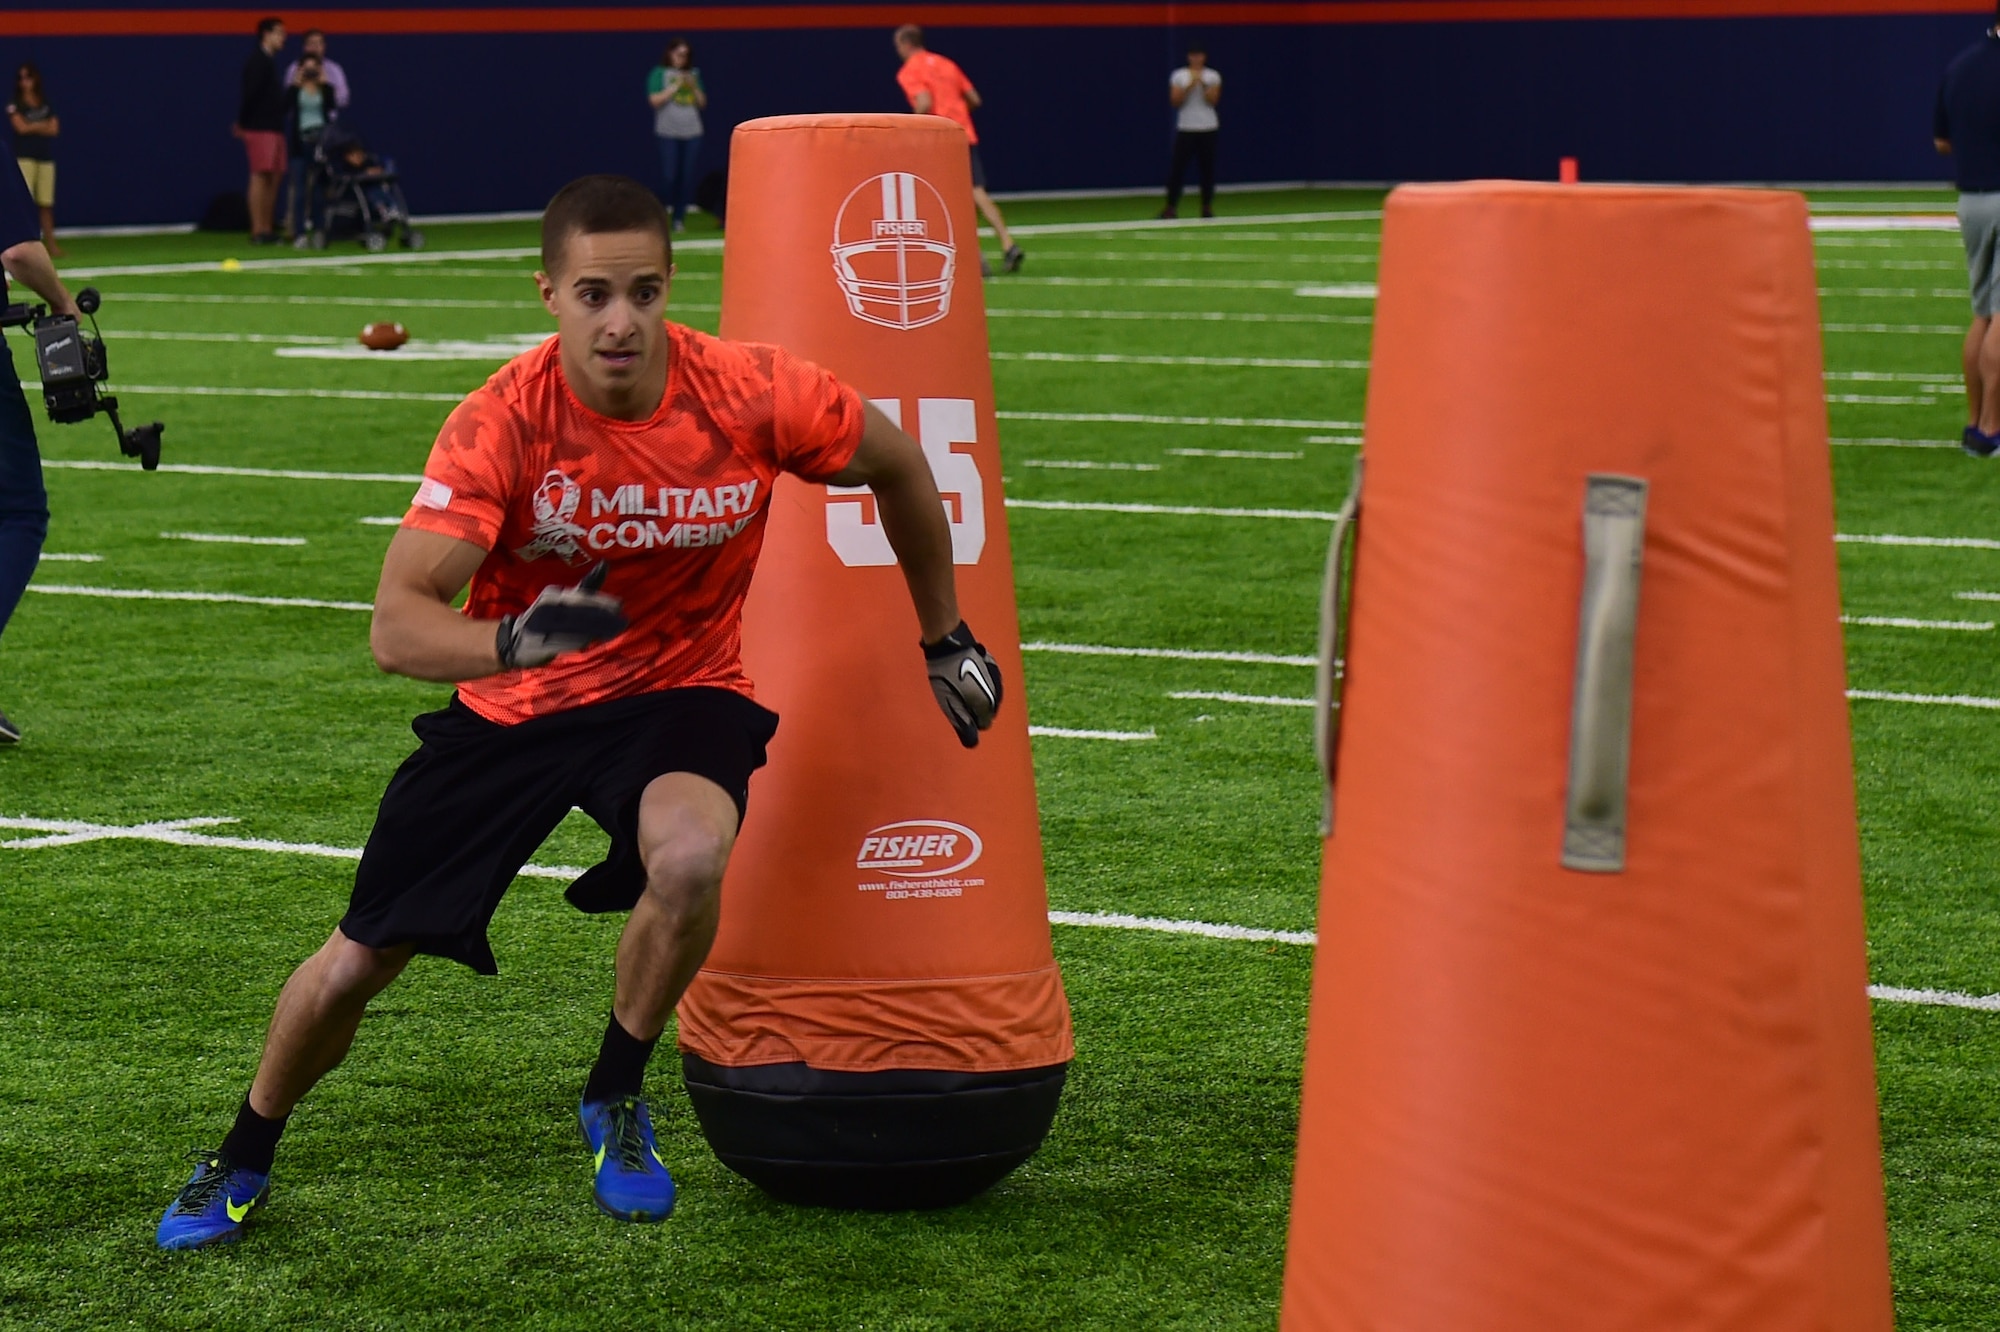 1st Lt. James Macandrew, 460th Space Wing Commanders Action Group chief, runs through tackling dummies during the five-man obstacle course of a military training camp at the Denver Broncos’ University of Colorado Health Training Center Fieldhouse in Englewood, Colo., August 25, 2016. Team Buckley won the military camp competition after participating in five head-to-head challenges including: team ball catching, a gauntlet, tackling dummy relay, sled push and the kneeling power ball launch. (U.S. Air Force photo by Airman 1st Class Gabrielle Spradling/Released)